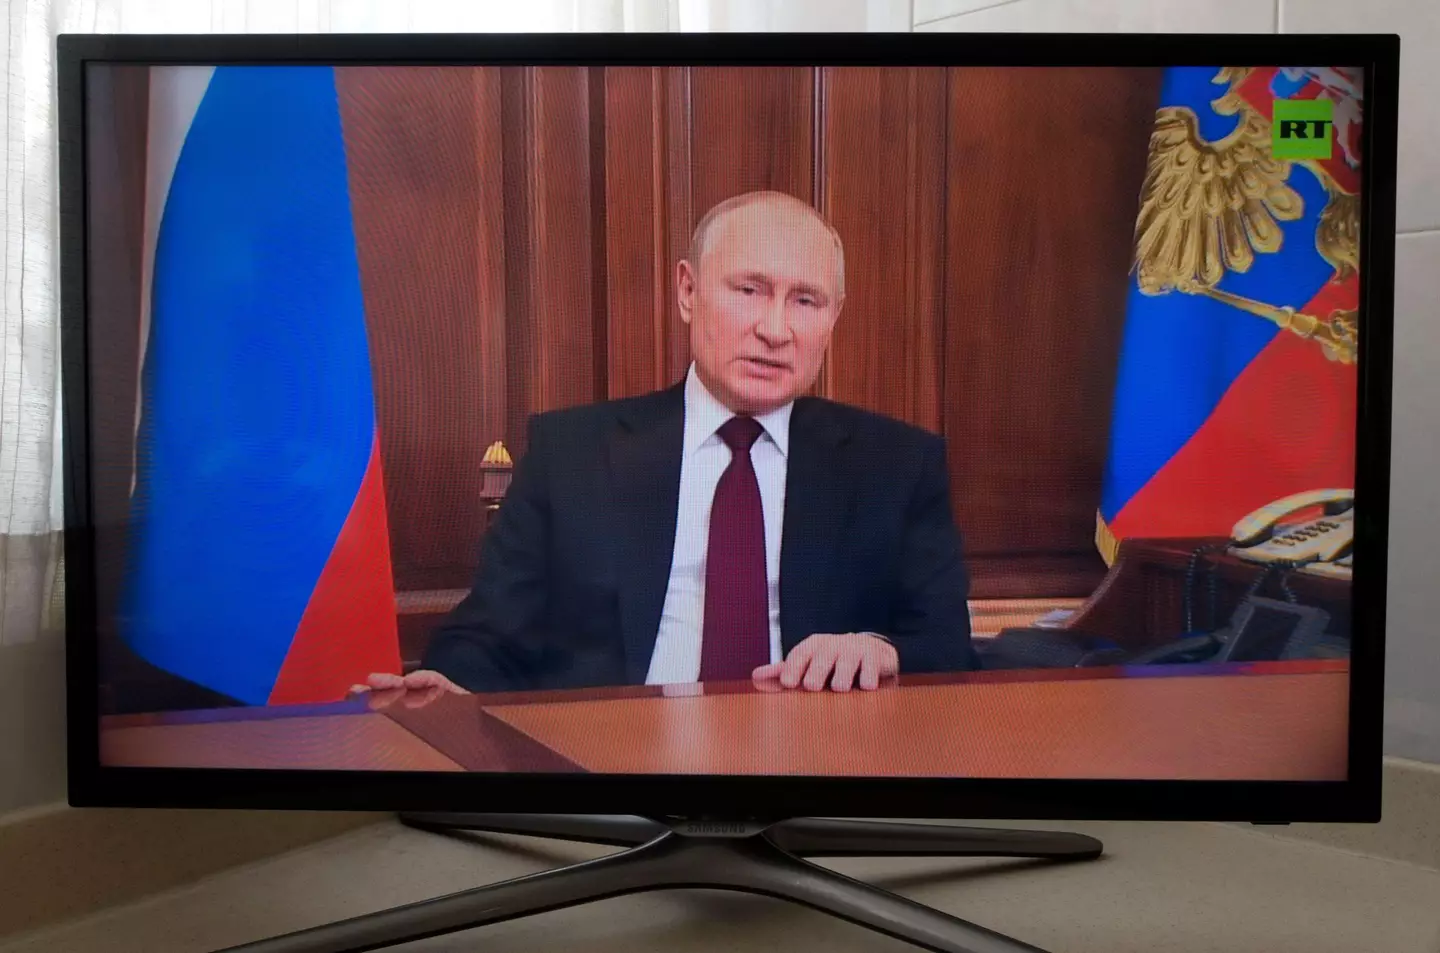 Putin made accusations about the West during his televised address.